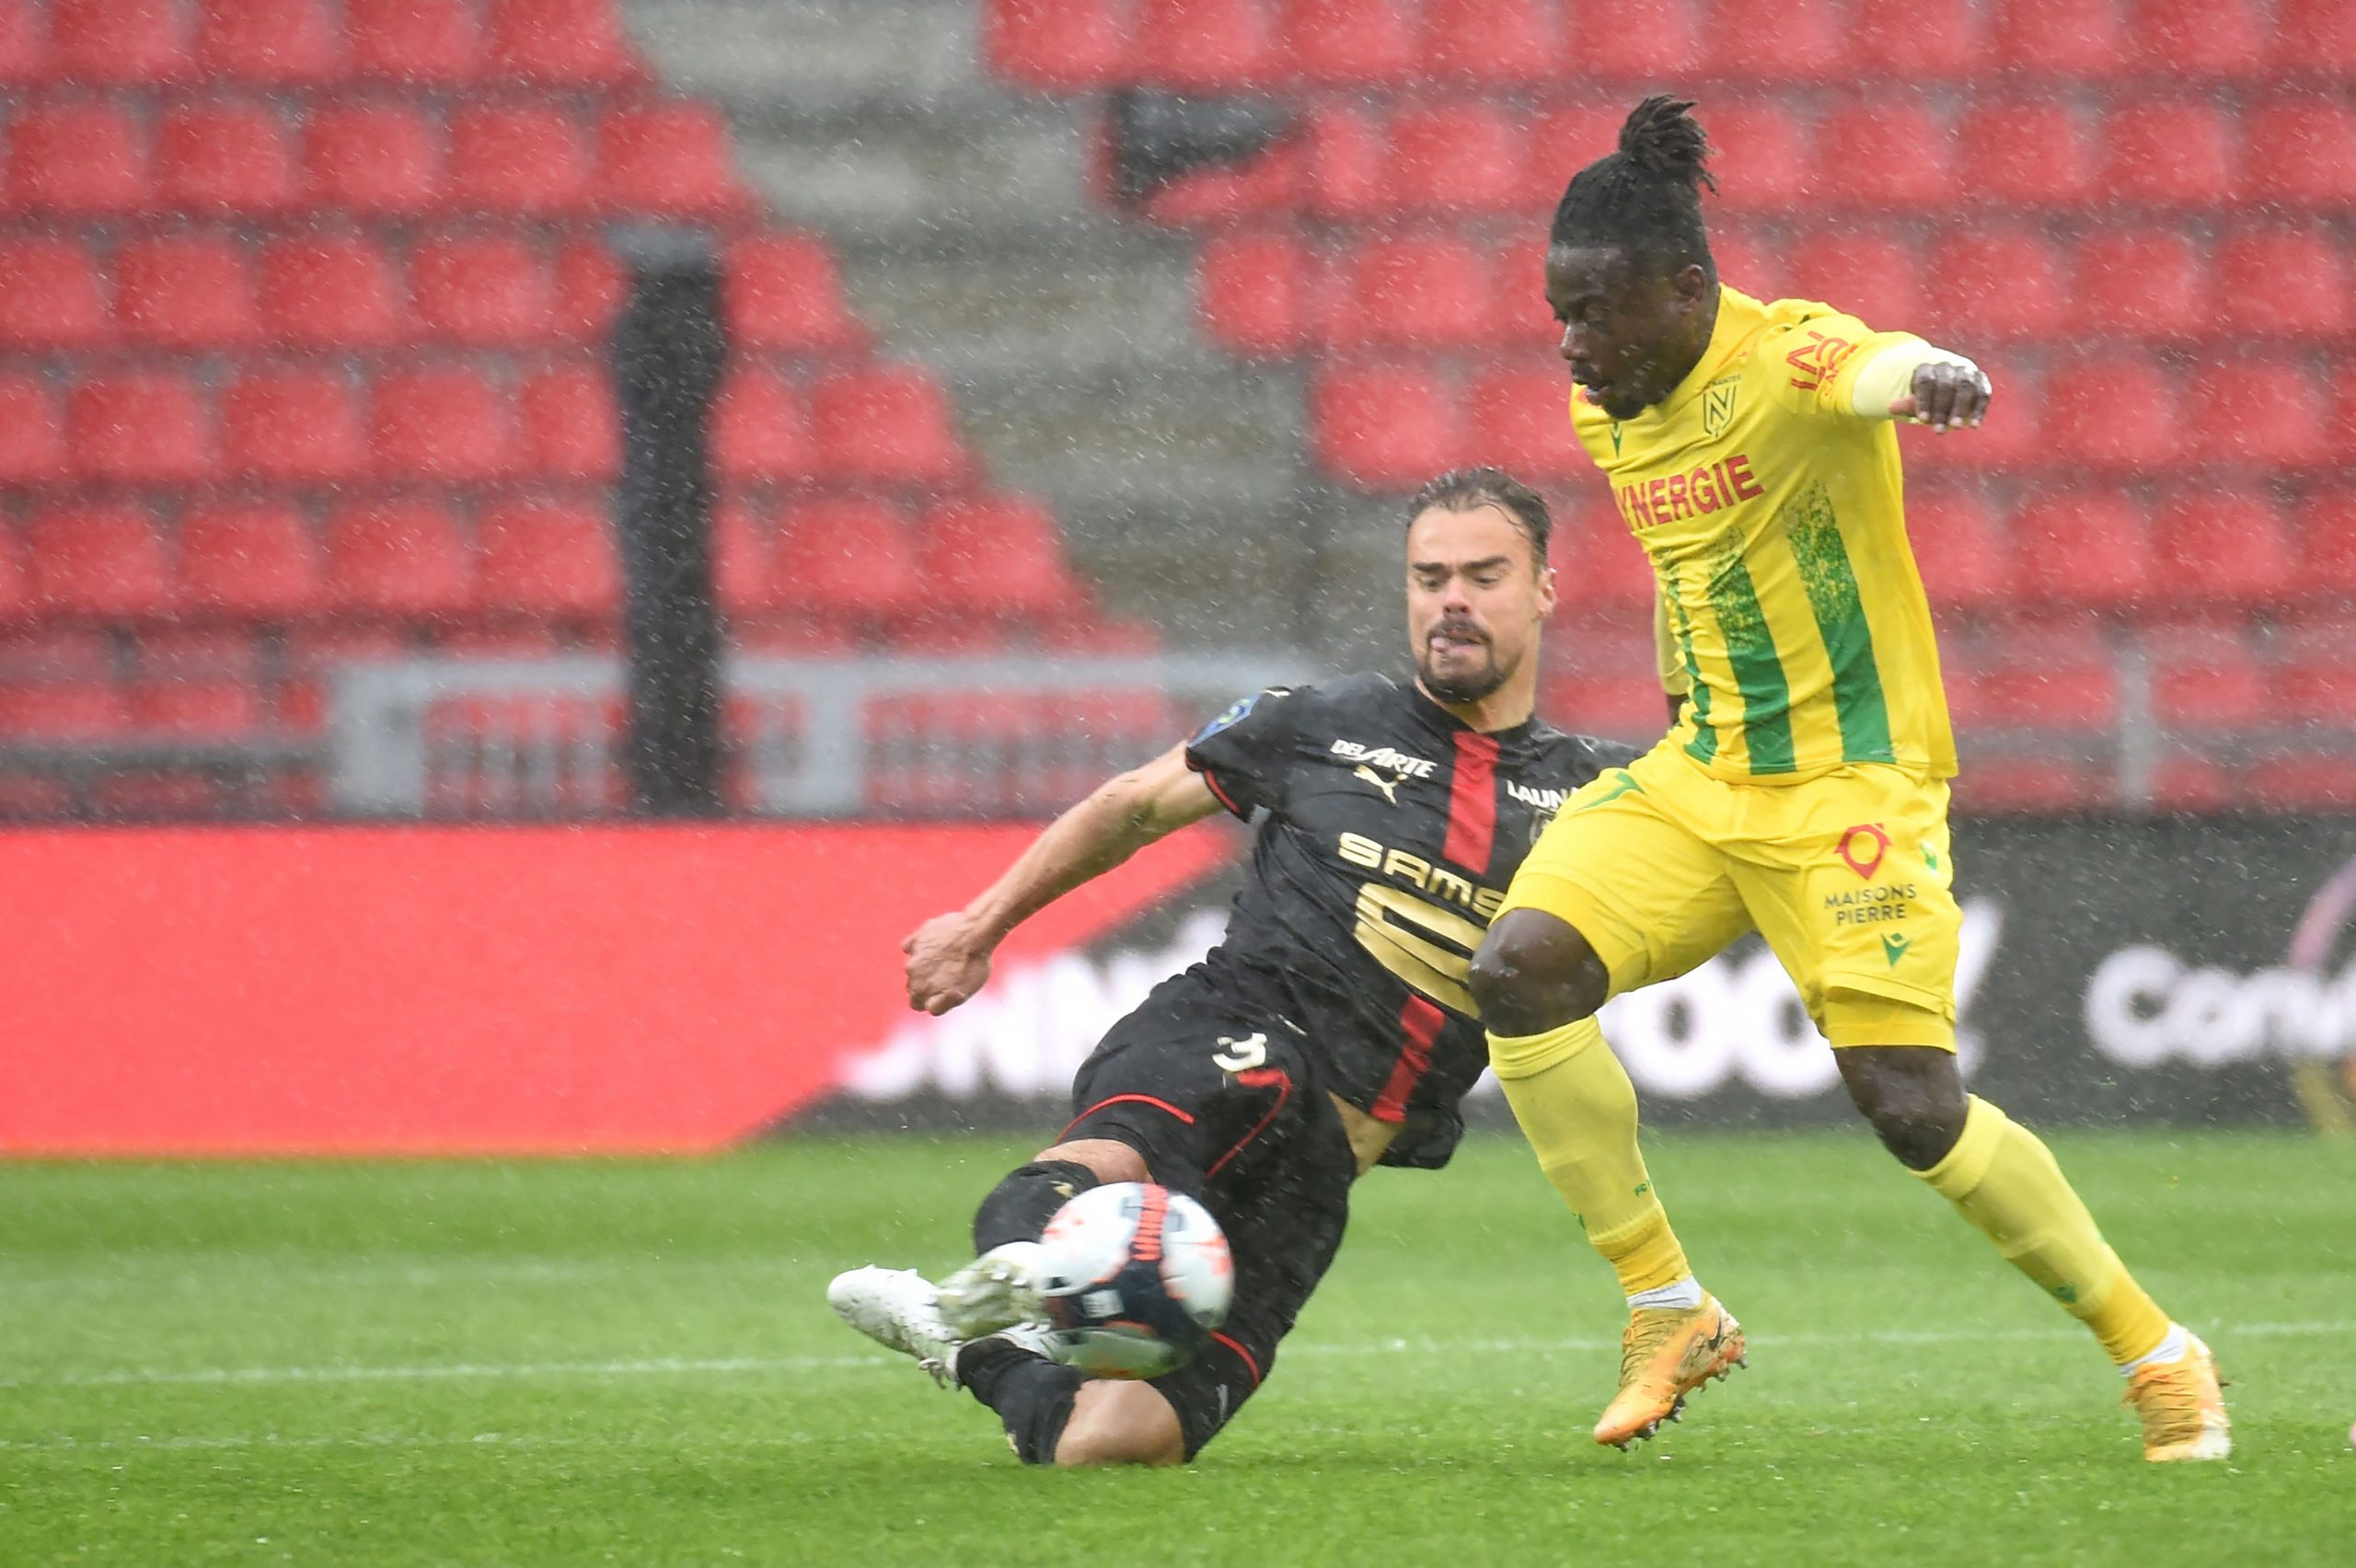 Rennes' French defender Damien Da Silva (L) fights for the ball with Nantes' Nigerian forward Moses Simon during the French L1 football match between Stade Rennais (Rennes) and FC Nantes at The Roazhon Park Stadium in Rennes, north-western France on April 11, 2021. (Photo by JEAN-FRANCOIS MONIER / AFP) (Photo by JEAN-FRANCOIS MONIER/AFP via Getty Images)The 4th Official uses images provided by the following image agency: Getty Images (https://www.gettyimages.de/) Imago Images (https://www.imago-images.de/)